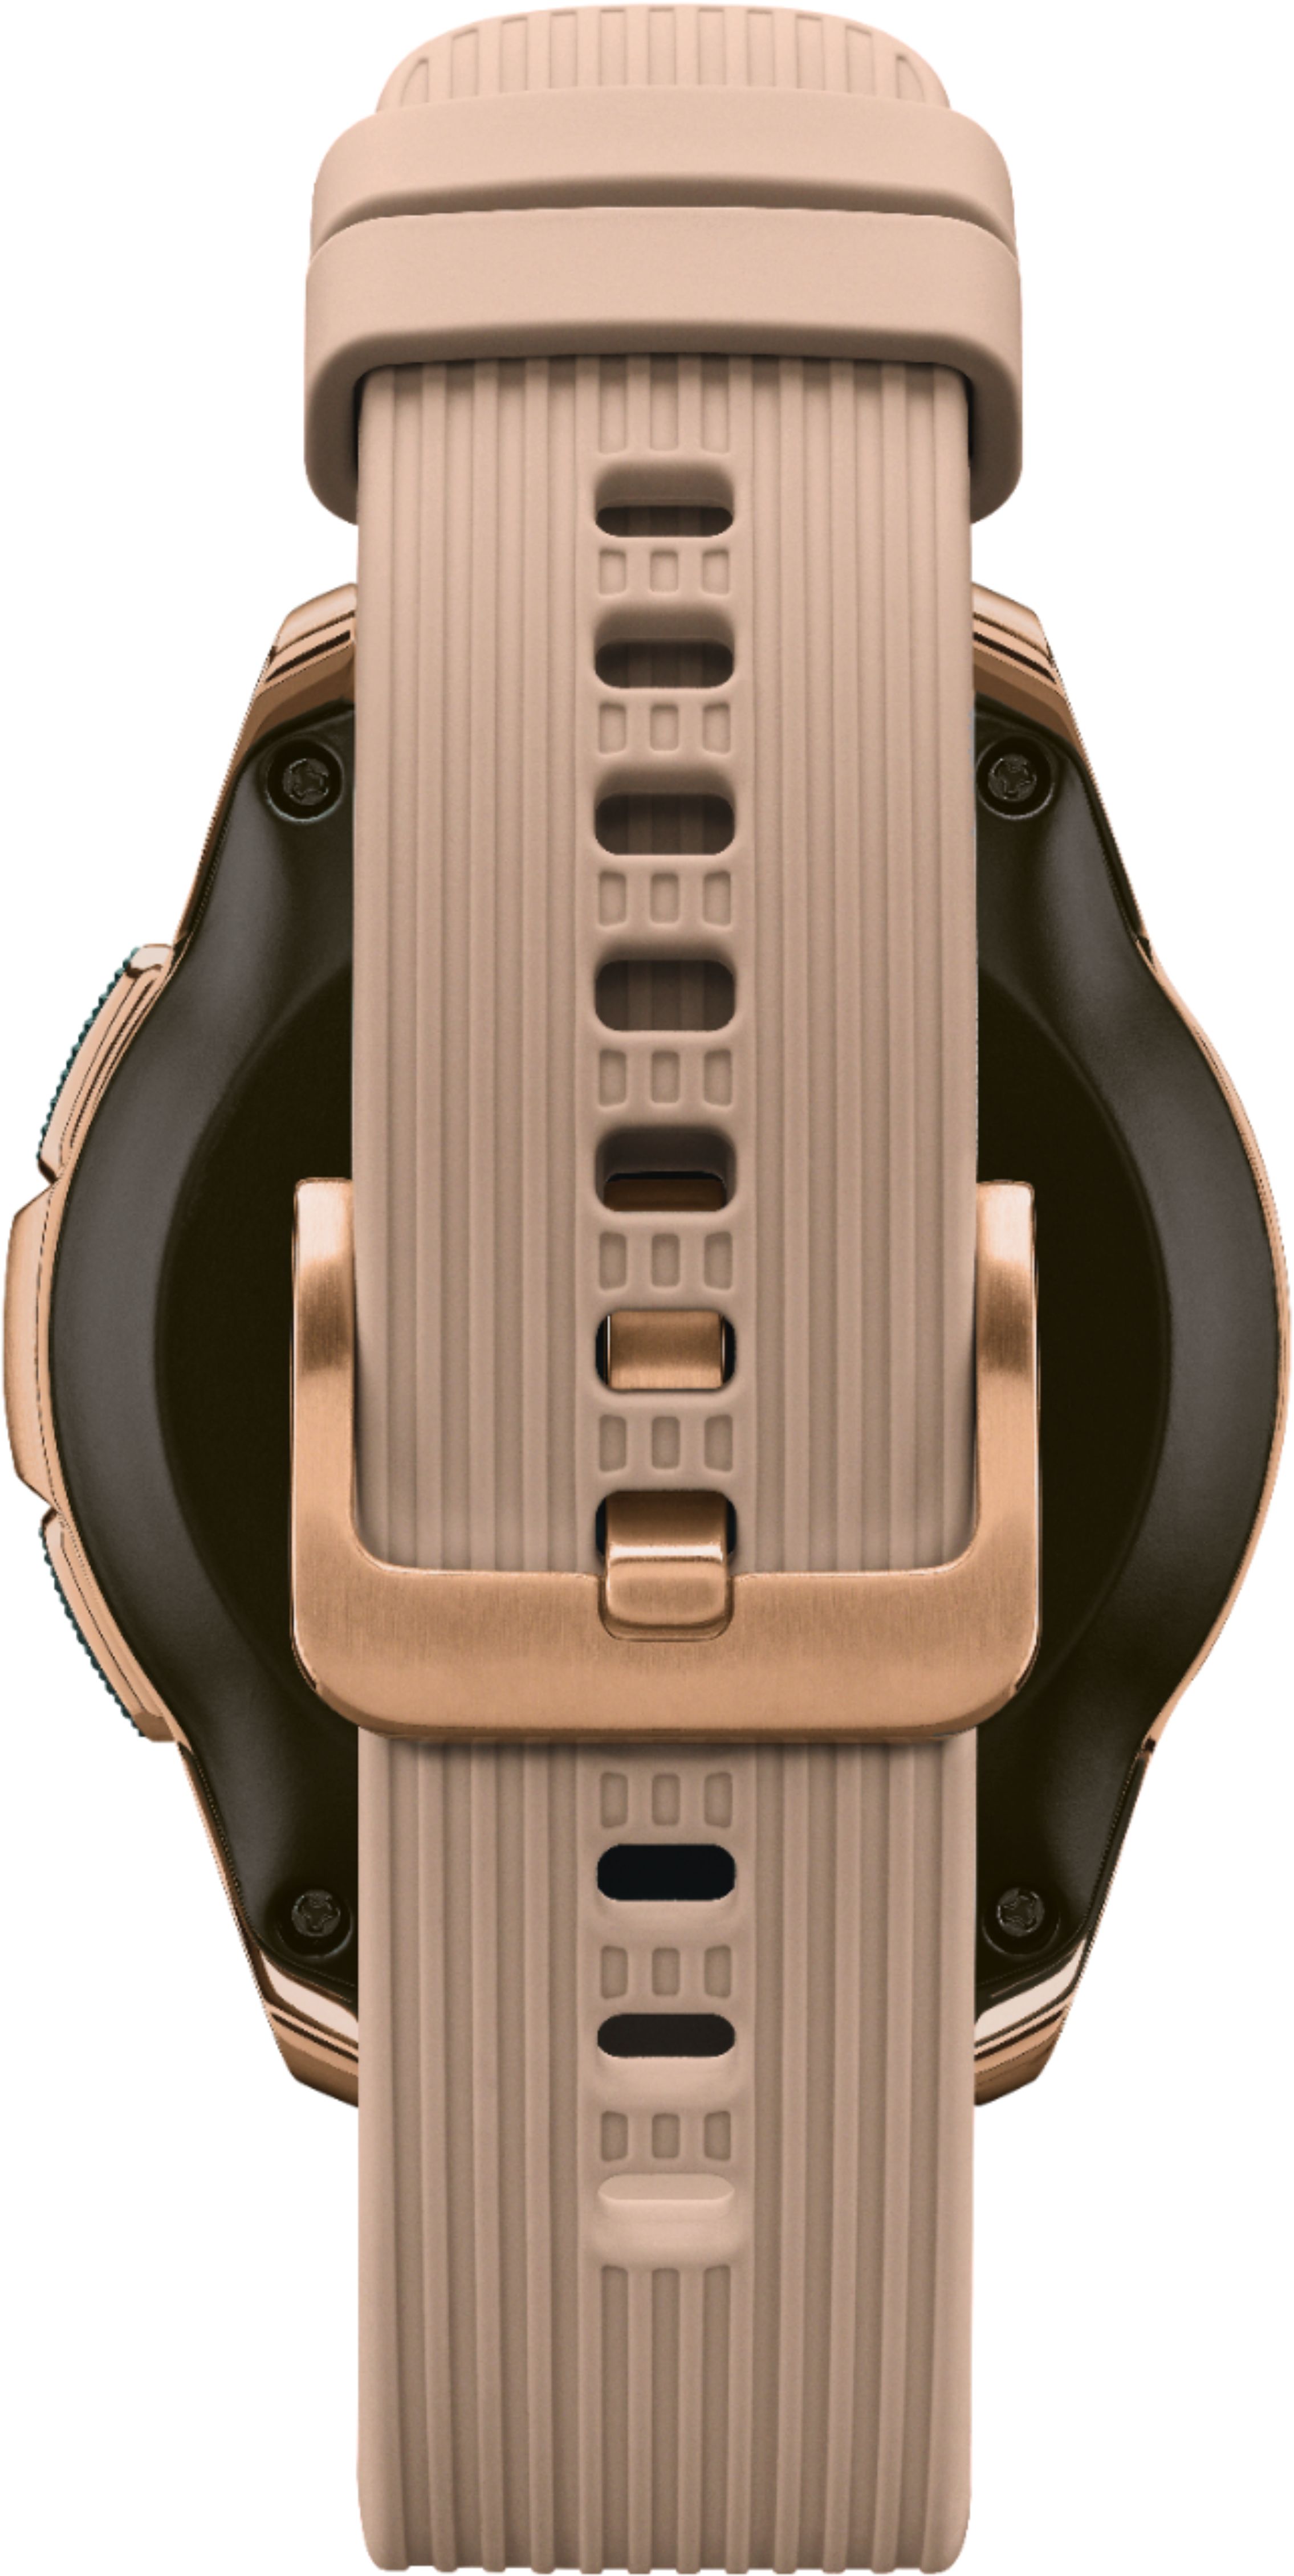 Back View: Samsung - Essex Leather Watch Band for Galaxy Watch 46mm - Brown